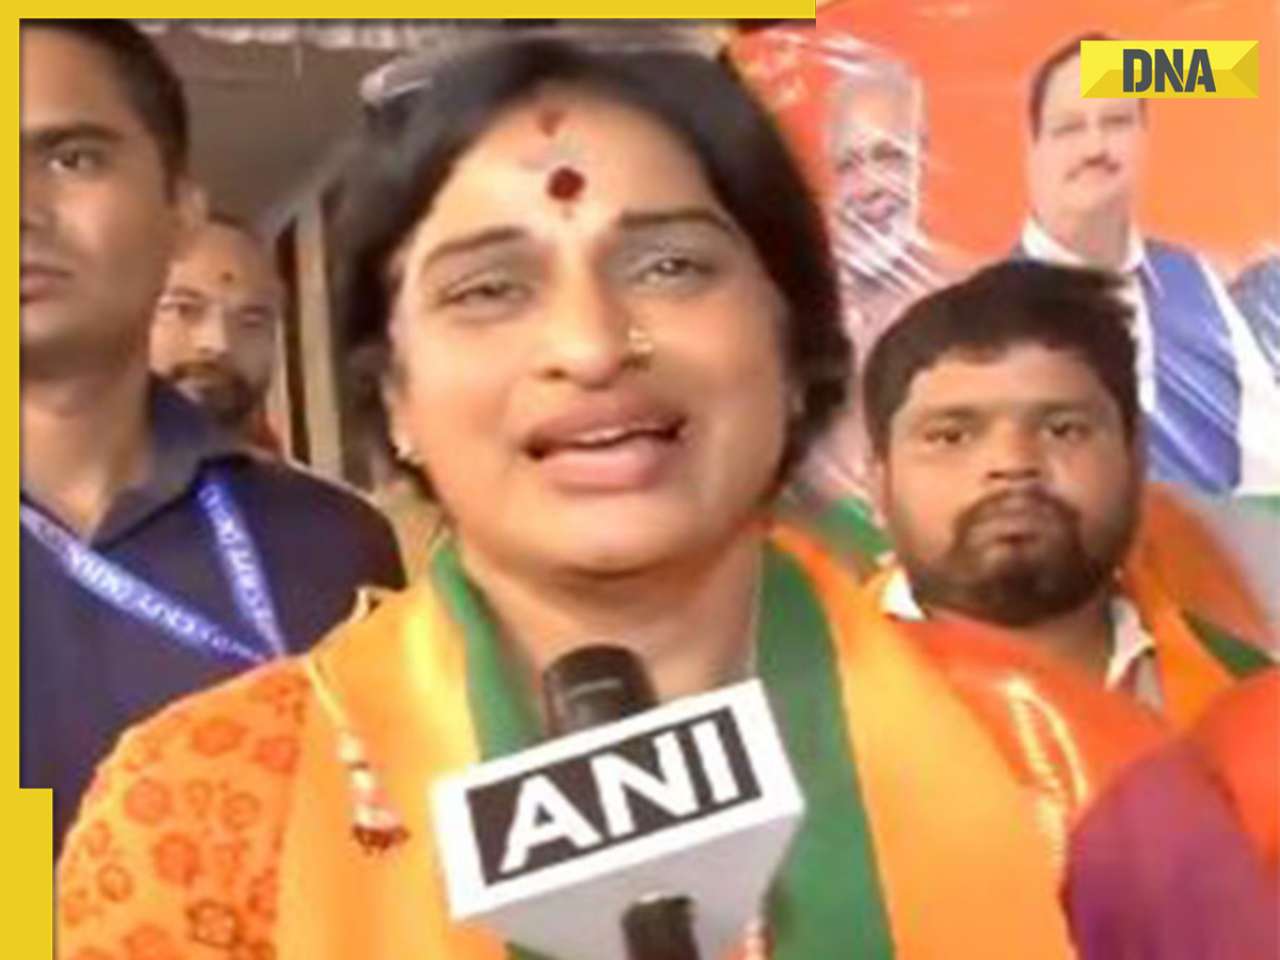 'We will surely win Hyderabad this time...': BJP's Madhavi Latha on her chances against Asaduddin Owaisi